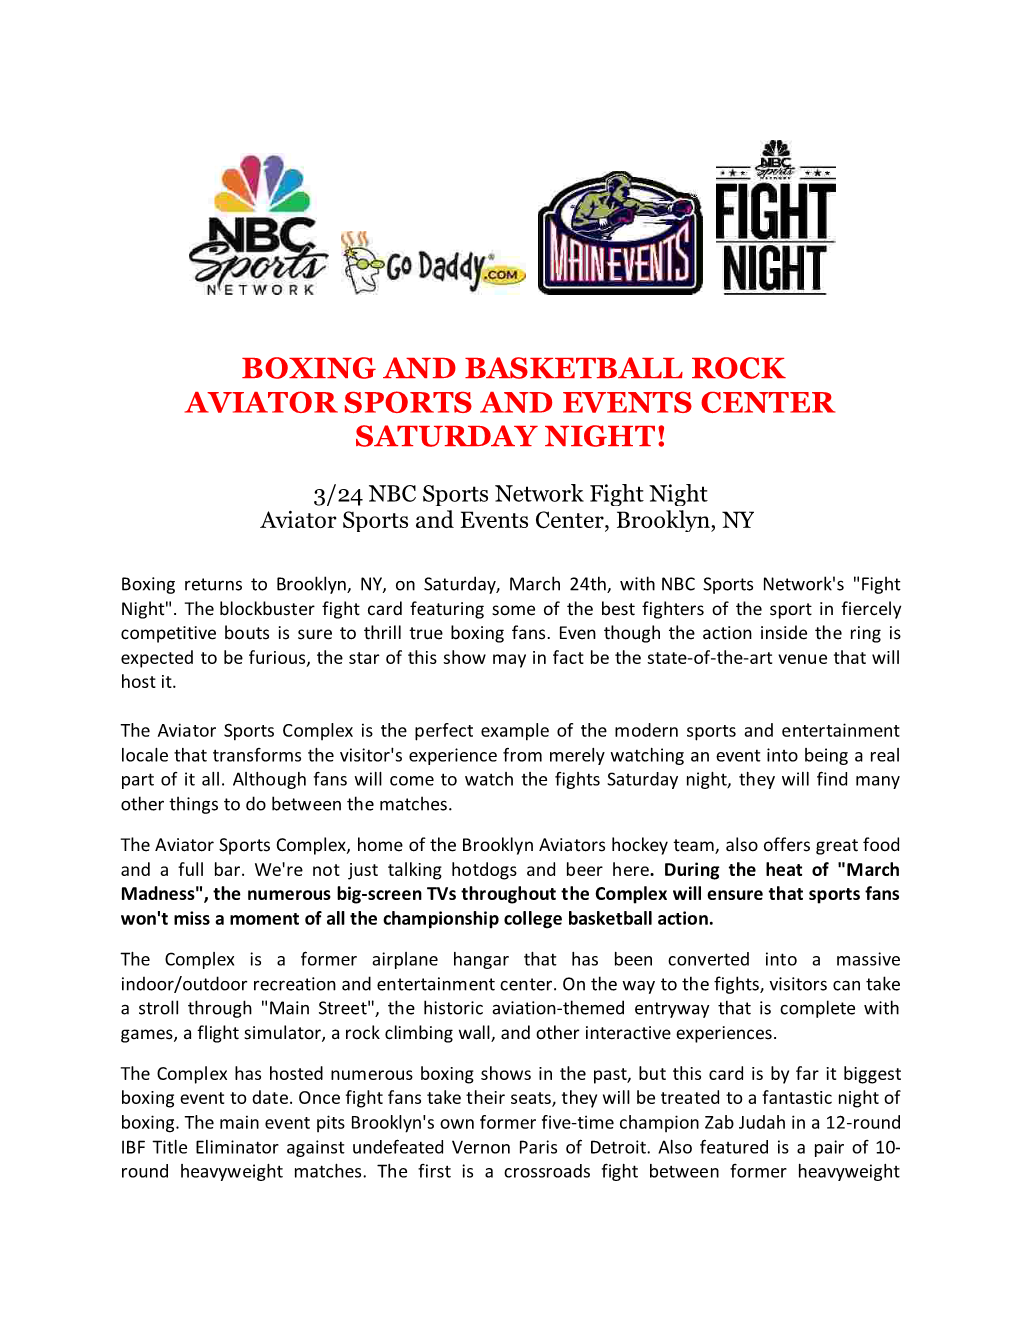 Boxing and Basketball Rock Aviator Sports and Events Center Saturday Night!